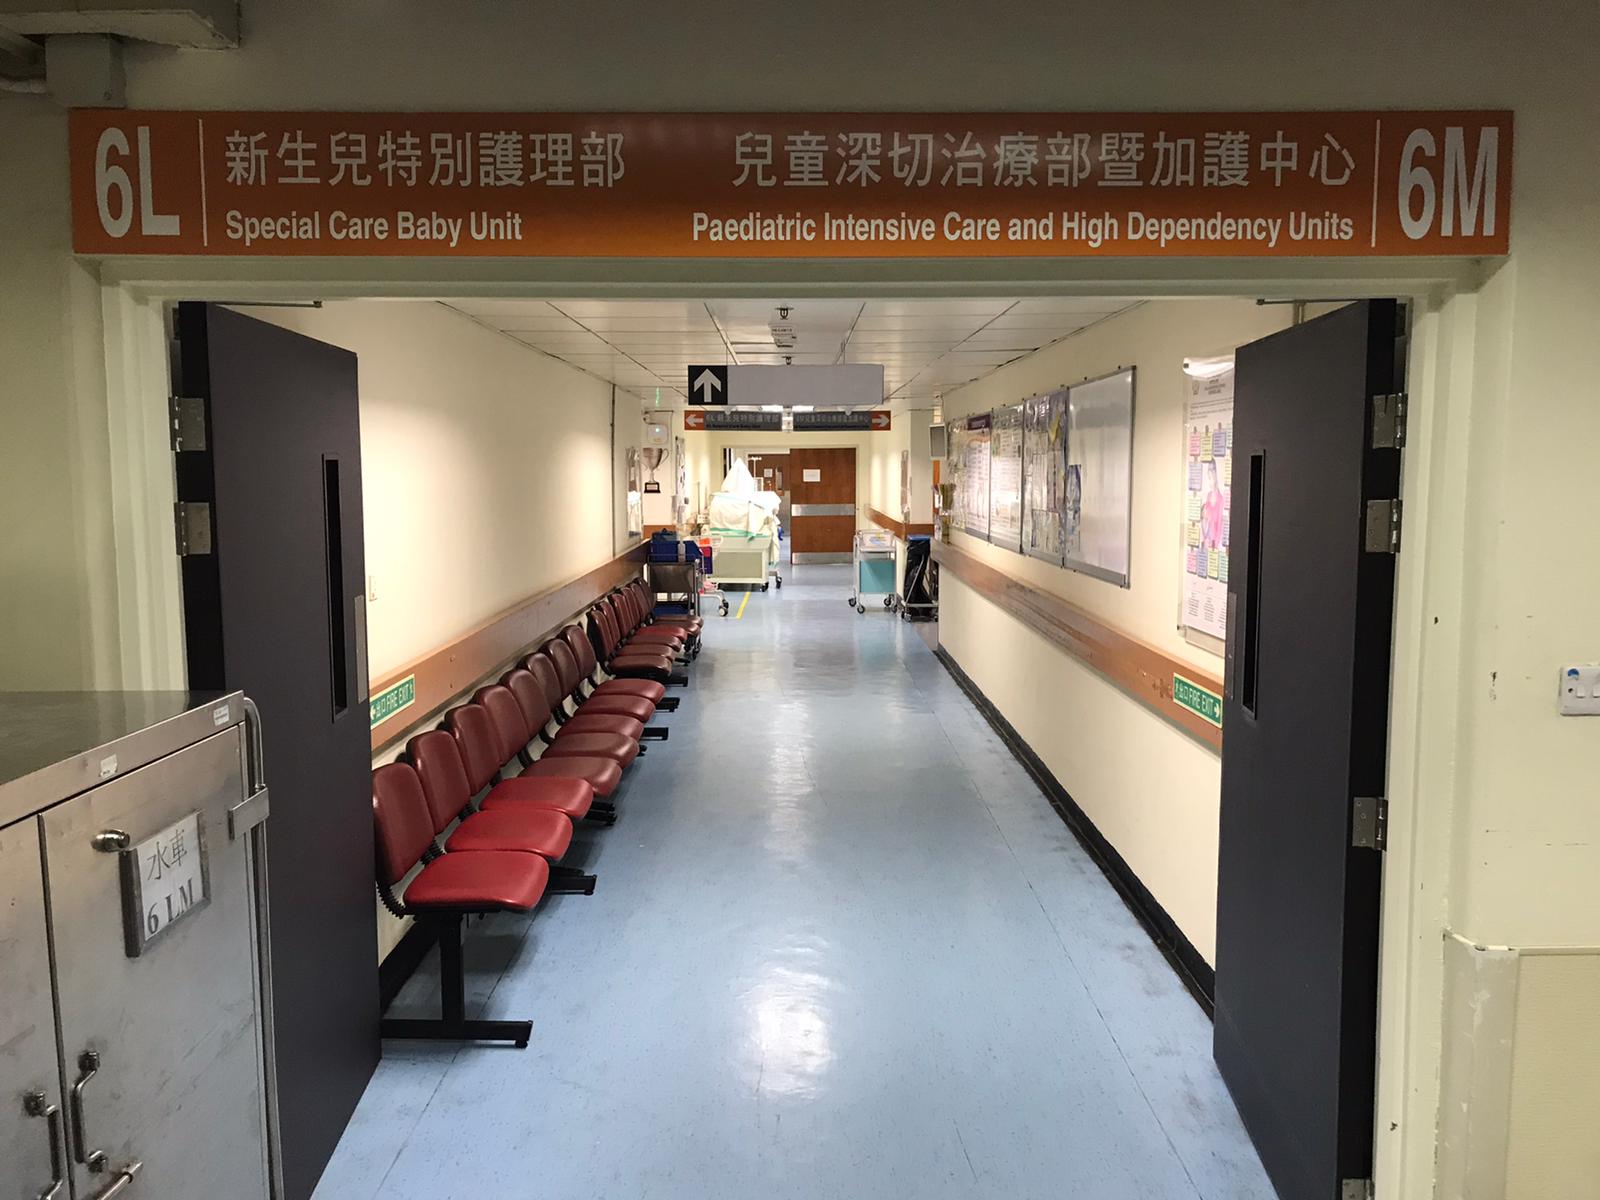 No visitors allowed: the Special Care Unit is empty after Hong Kong hospitals implement strict no-visitor rules to limit the risk of coronavirus infections.